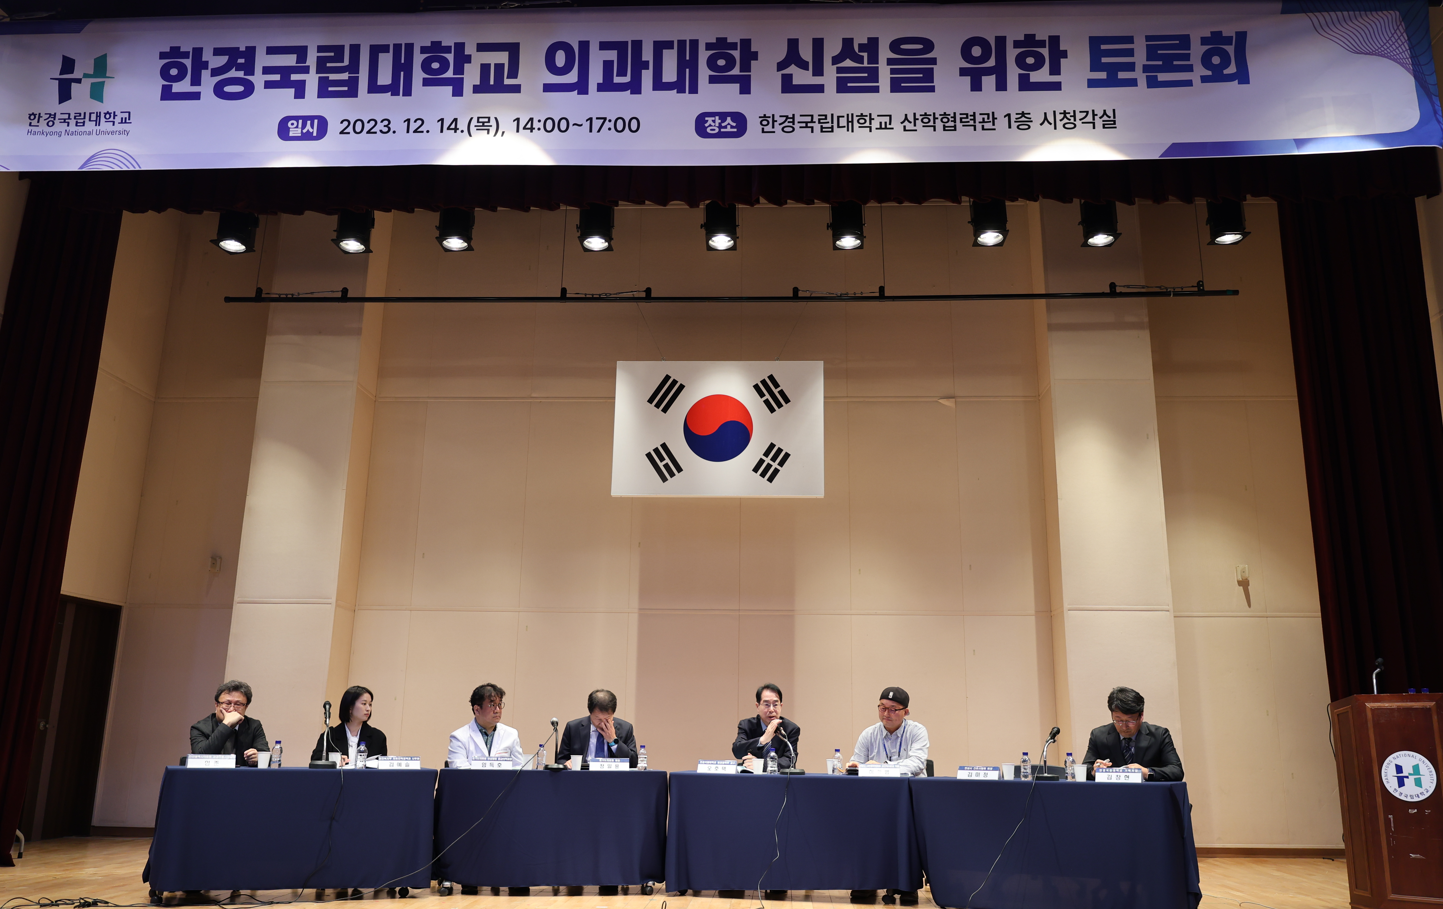 Hankyung National University successfully held a discussion for the establishment of a new medical s 대표이미지